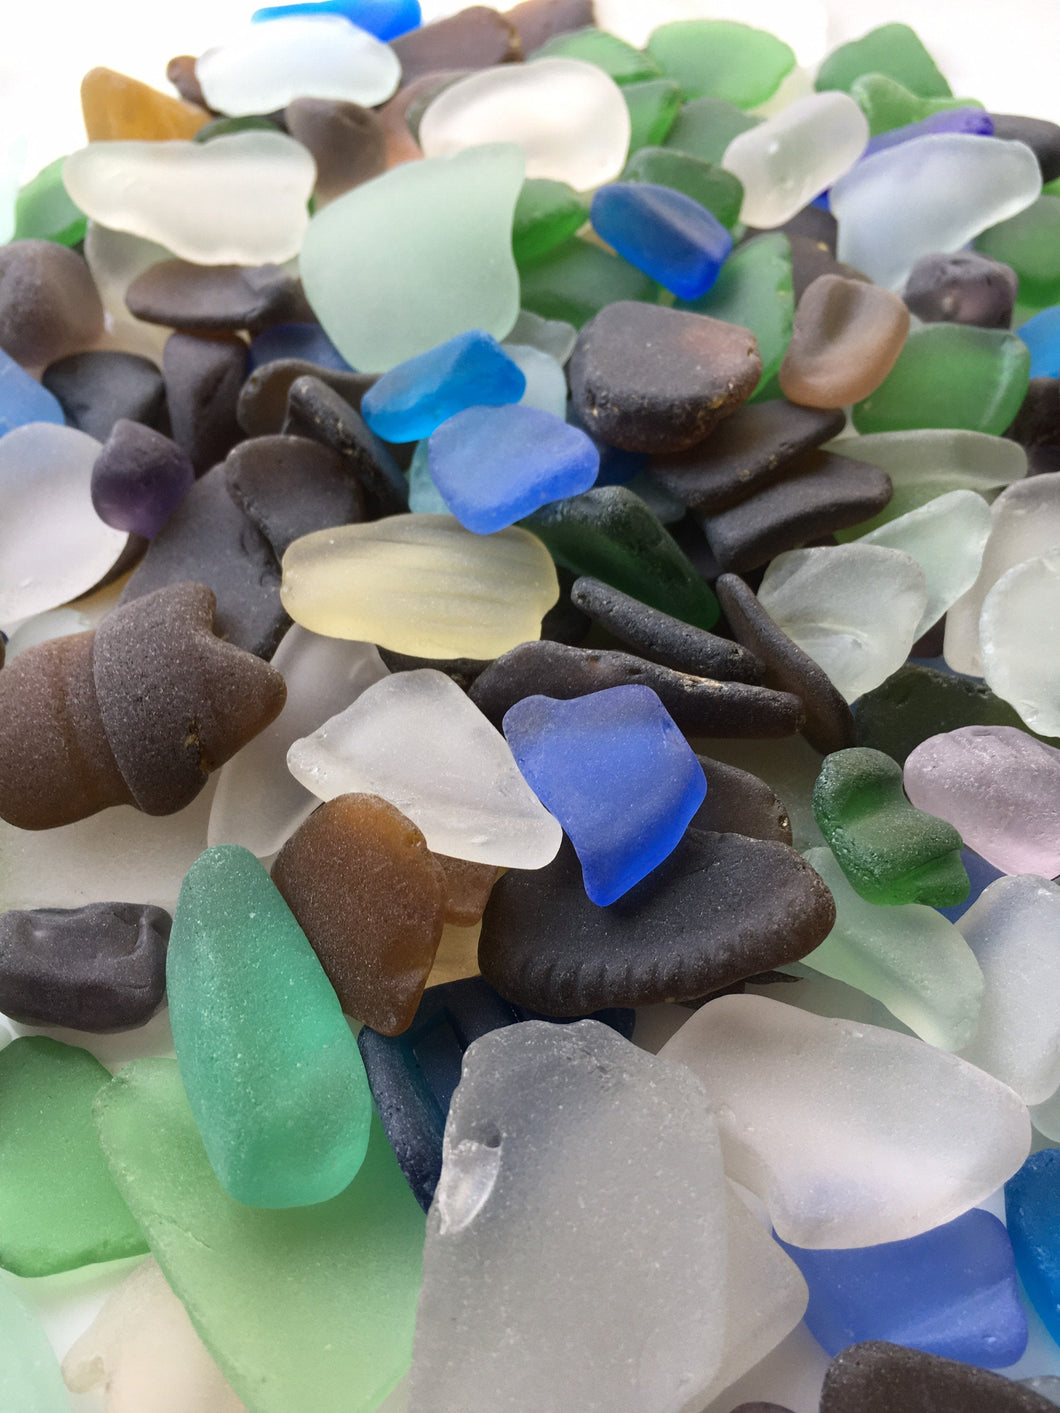 Medium Sea Glass Frosty Sea Glass Tumbled Beach Glass Great For Stain Glass and Jewelry Bulk Seaglass FREE SHIPPING!